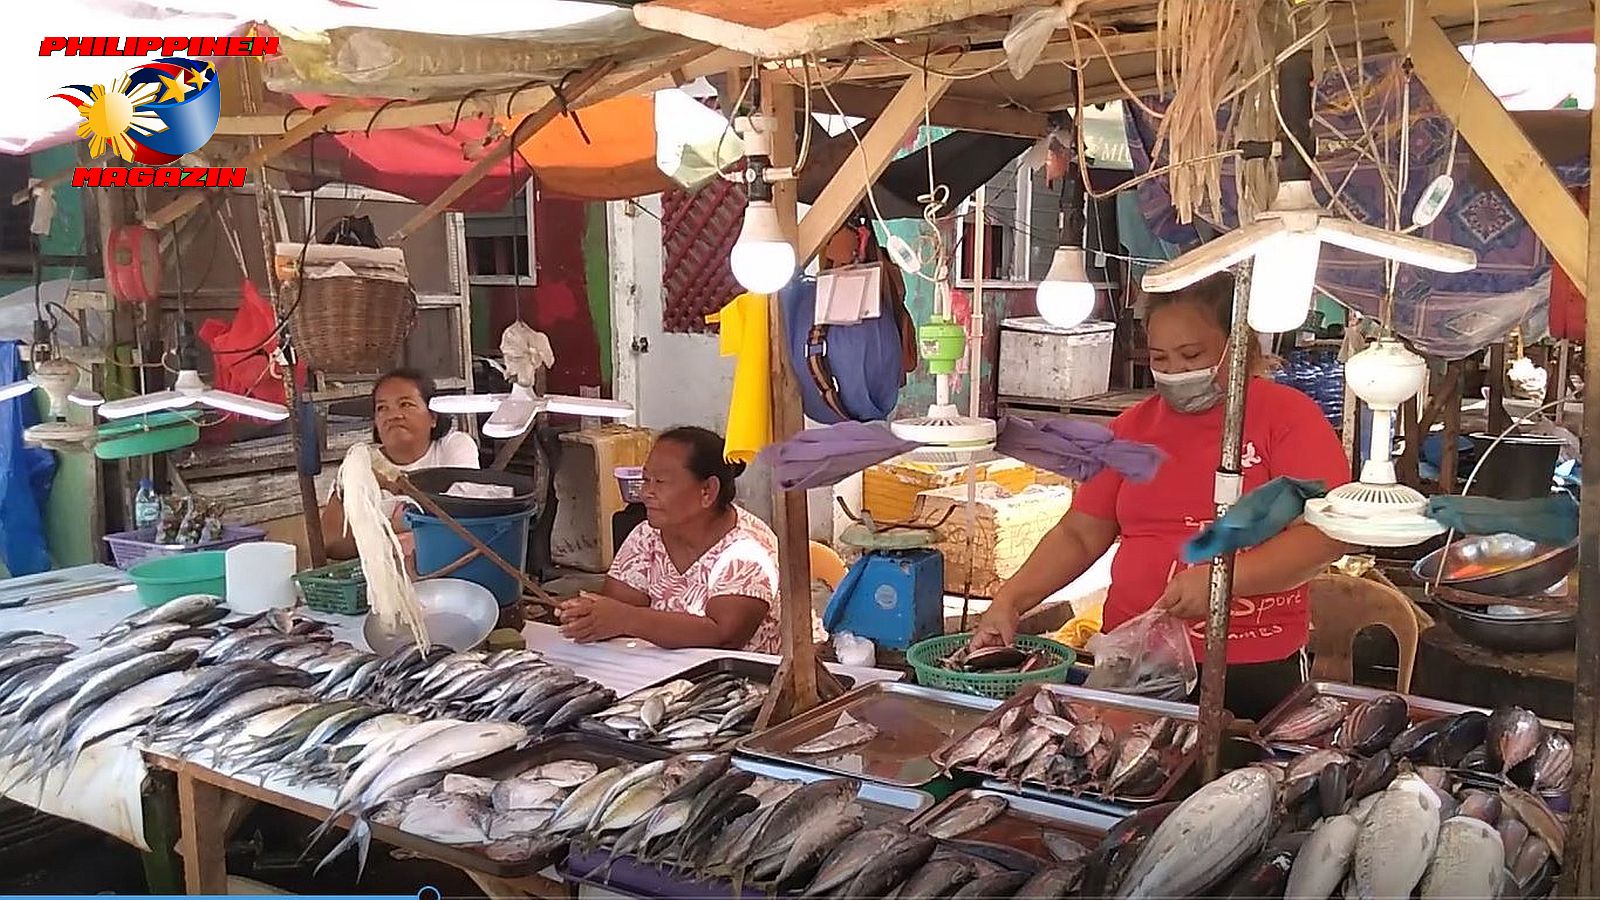 SIGHTS OF CAGAYAN DE ORO CITY & NORTHERN MINDANAO - IMAGE OF THE DAY - Fish Traders at the Market Photo by Sir Dieter Sokoll, KOR